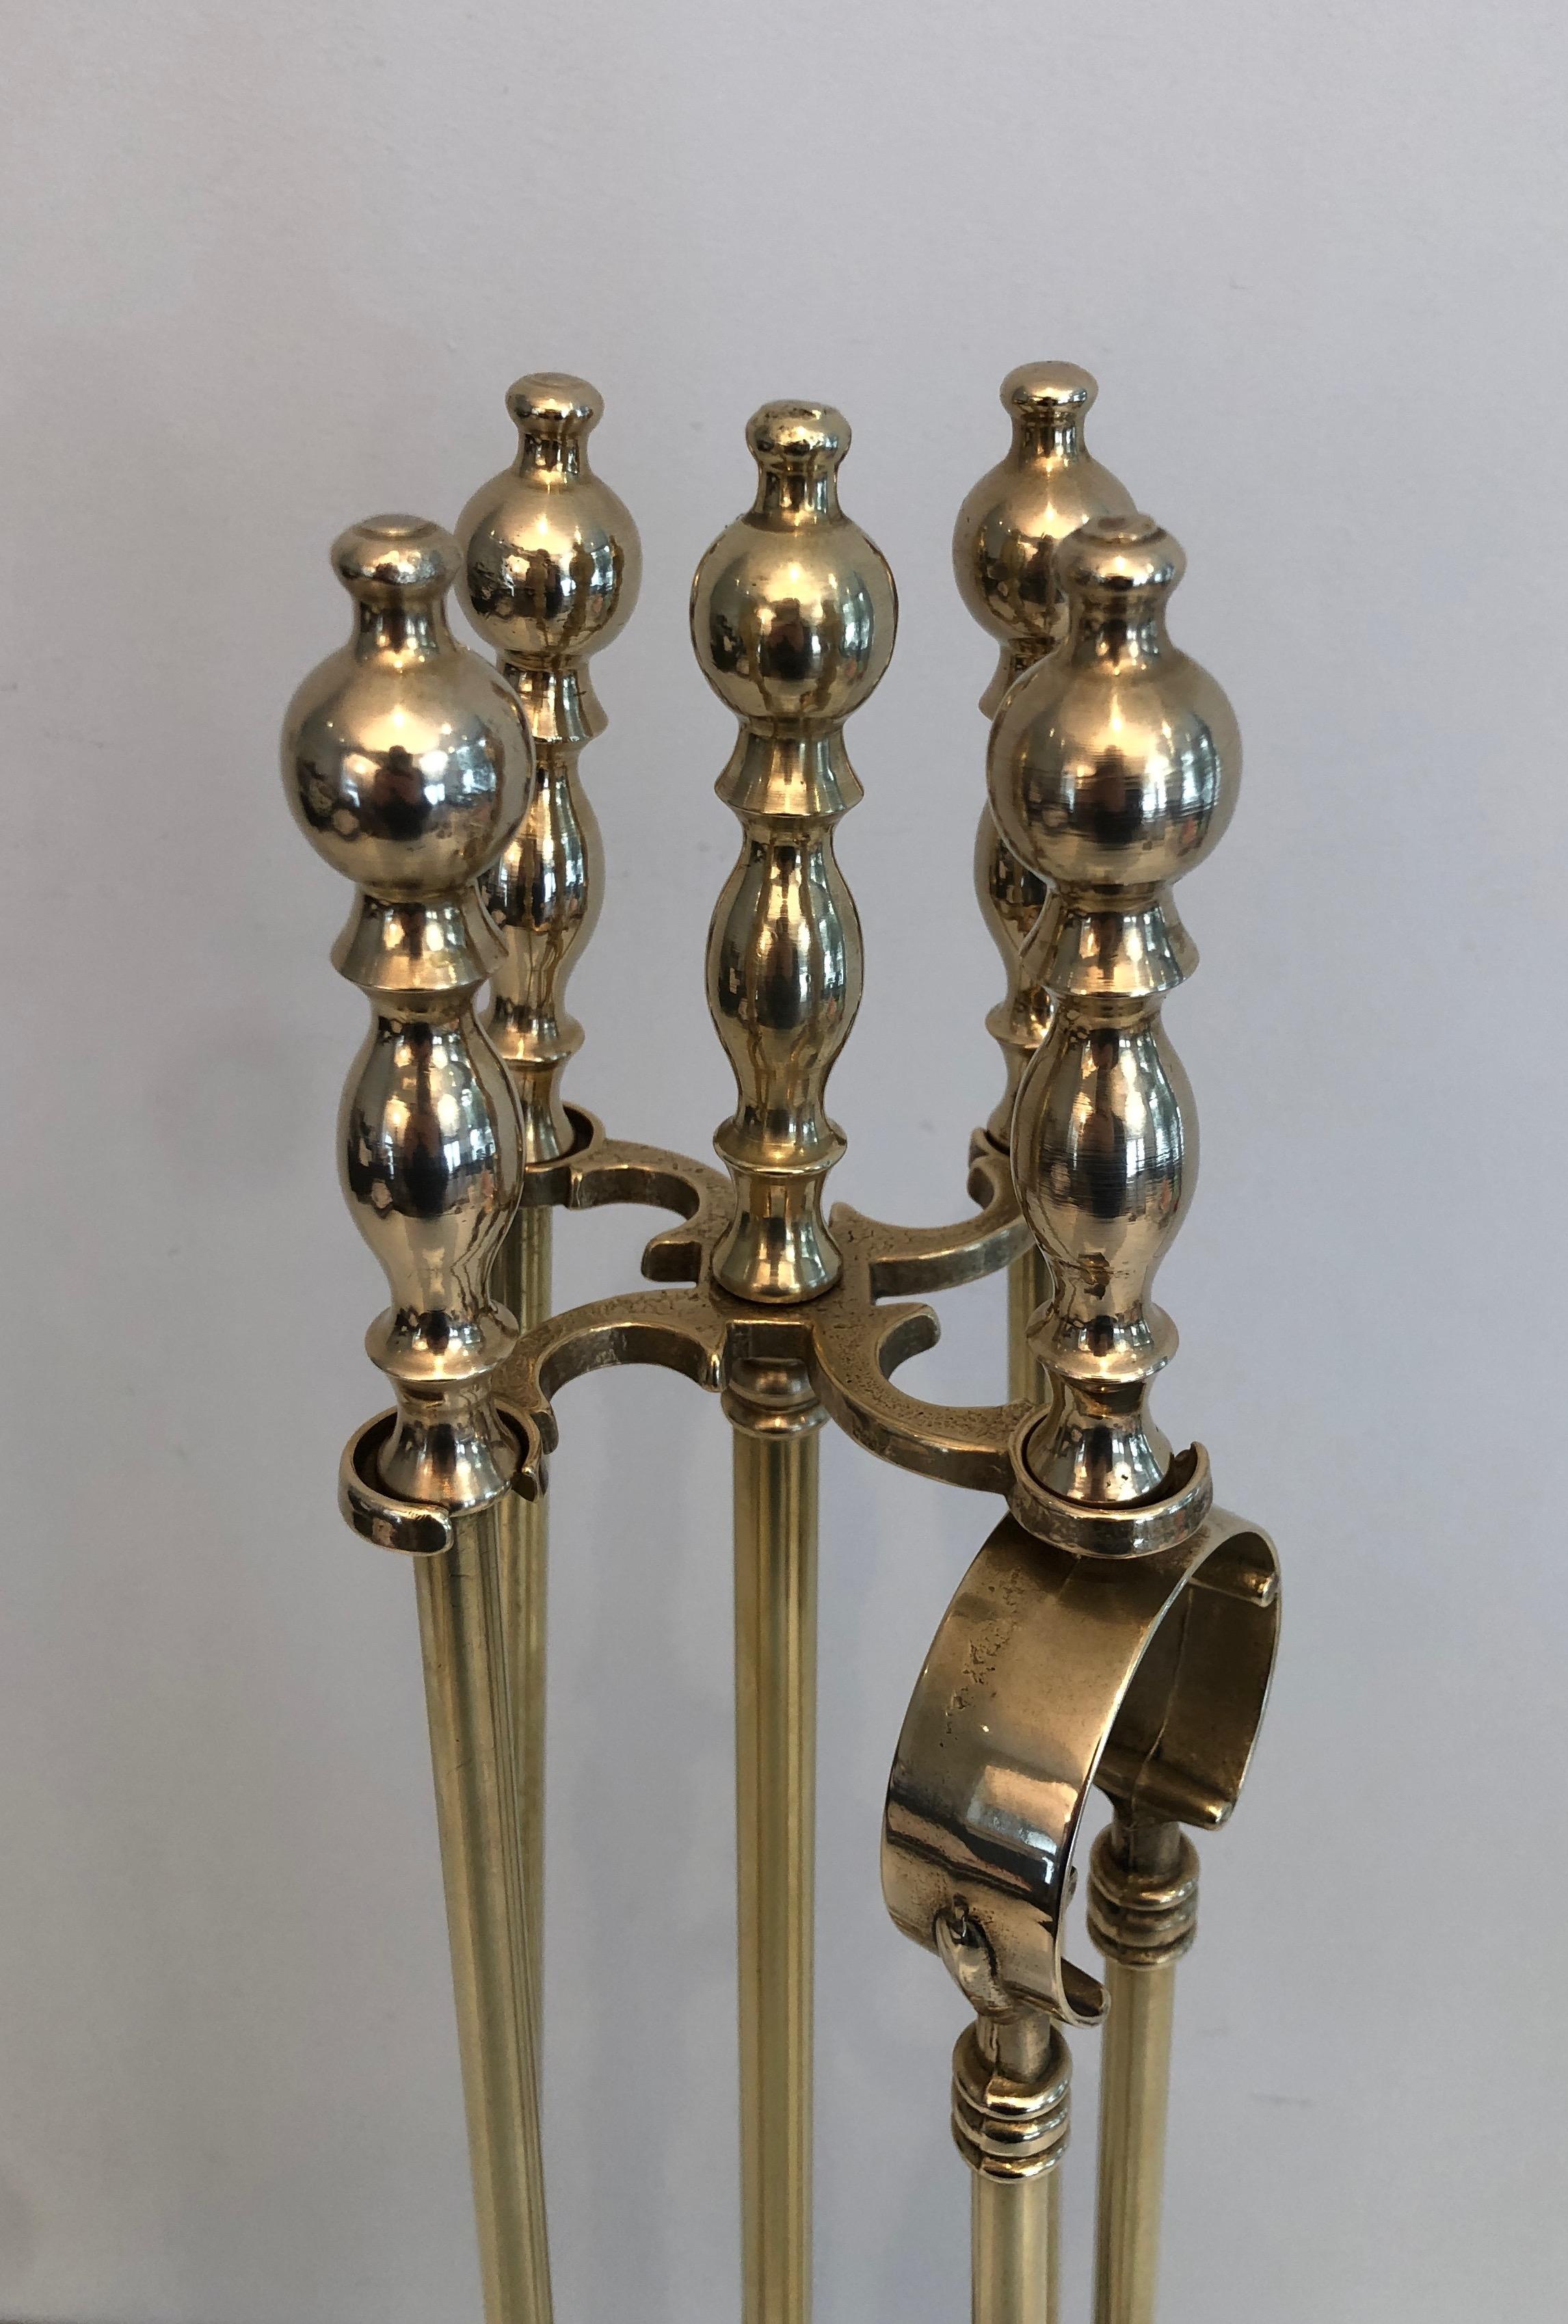 This neoclassical style fireplace tools on stand is made of brass. This is a French work, circa 1970.